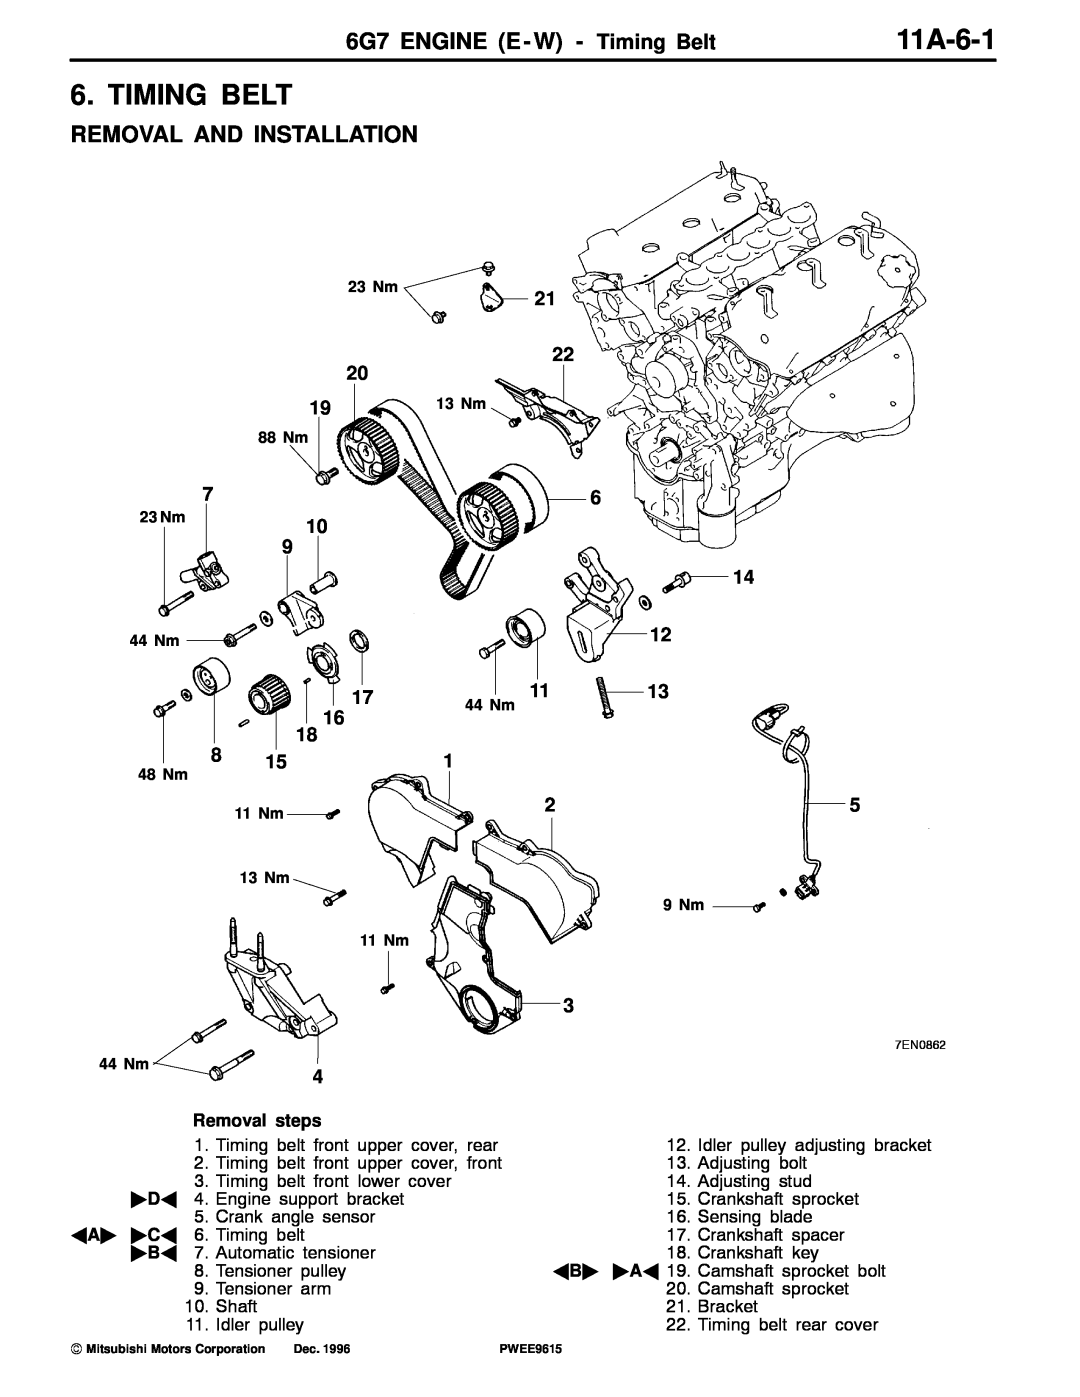 Mitsubishi specifications 11A-6-1, 6G7 ENGINE E - W - Timing Belt, 17 16 18 8, Removal And Installation 